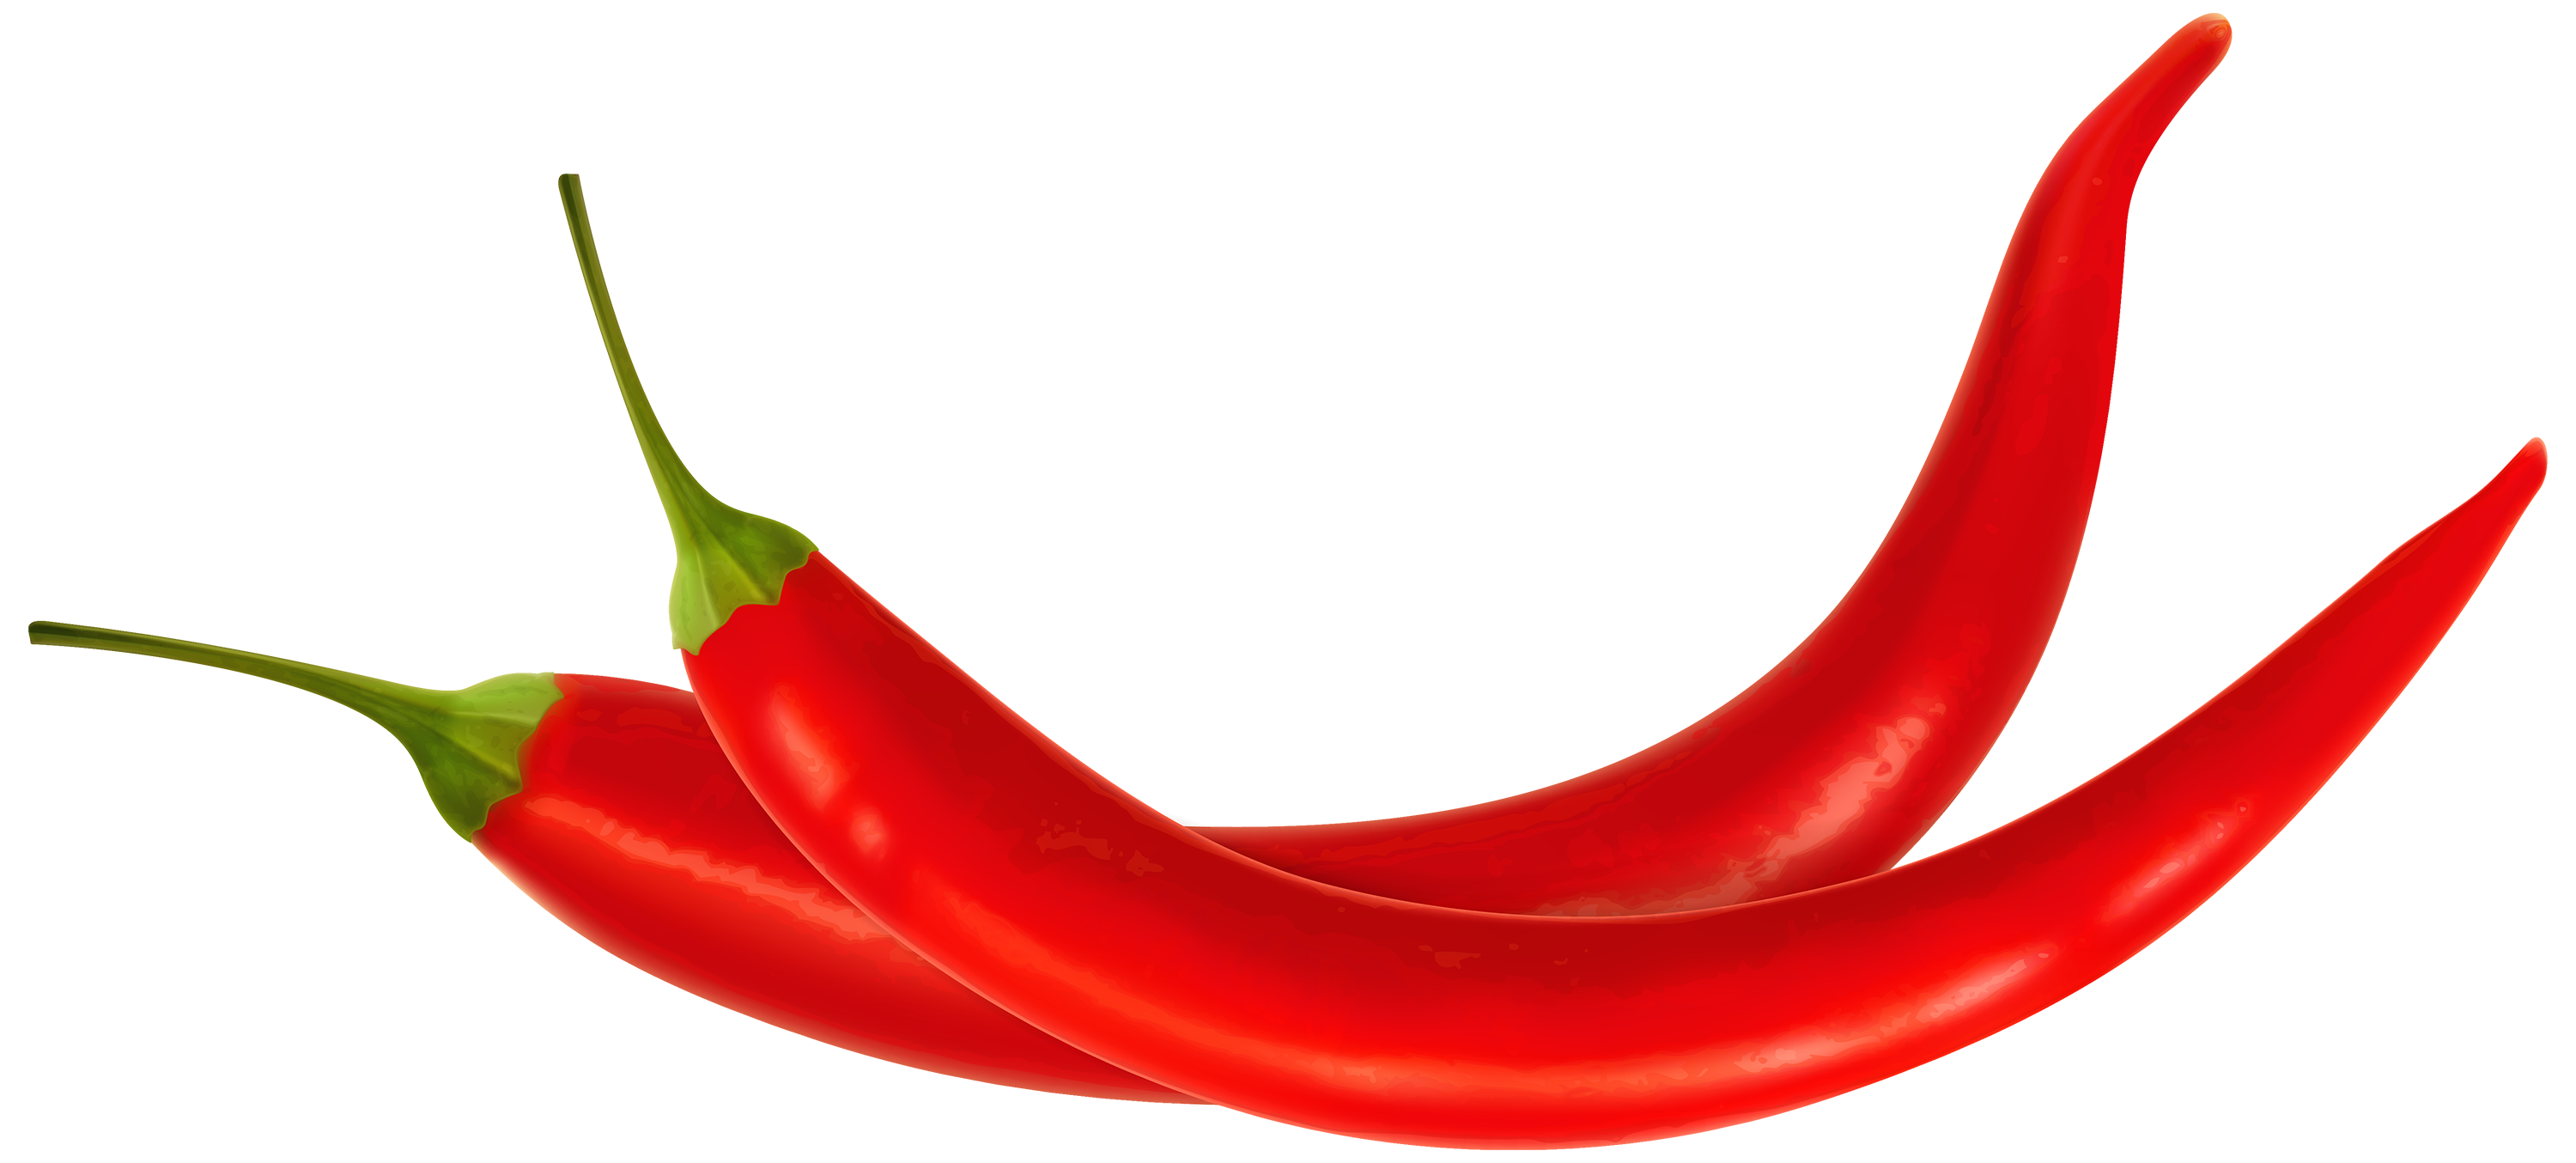 Free Chili Clip Art Pictures.